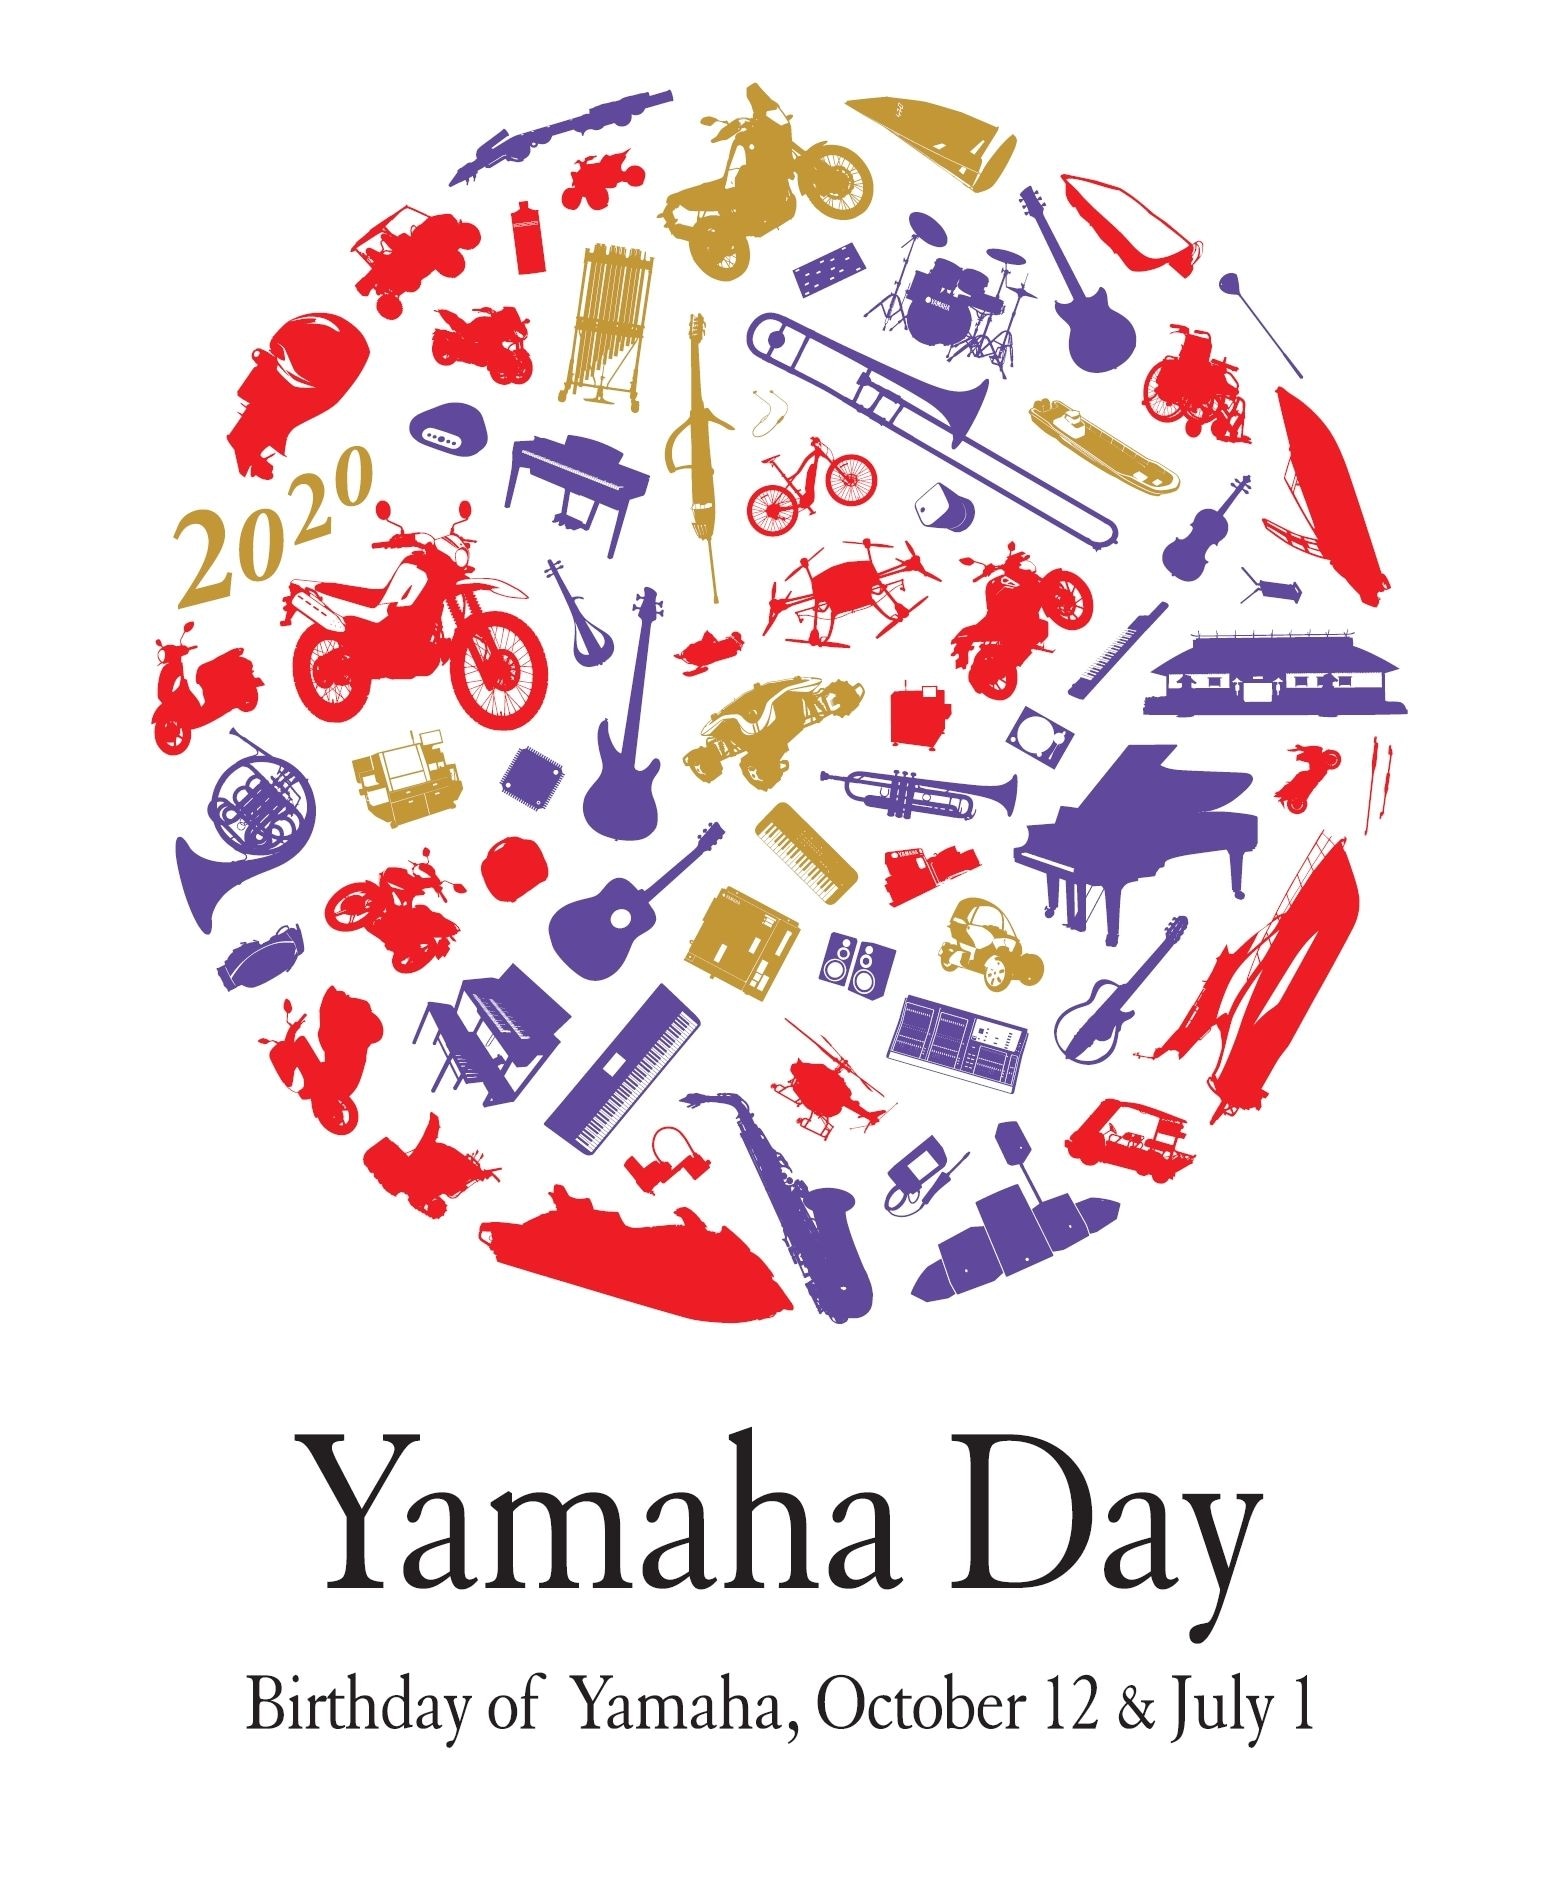 The 12th of October is Yamaha Day  where we celebrate the anniversary of the establishment of Yamaha Corporation on October 12, 1897!